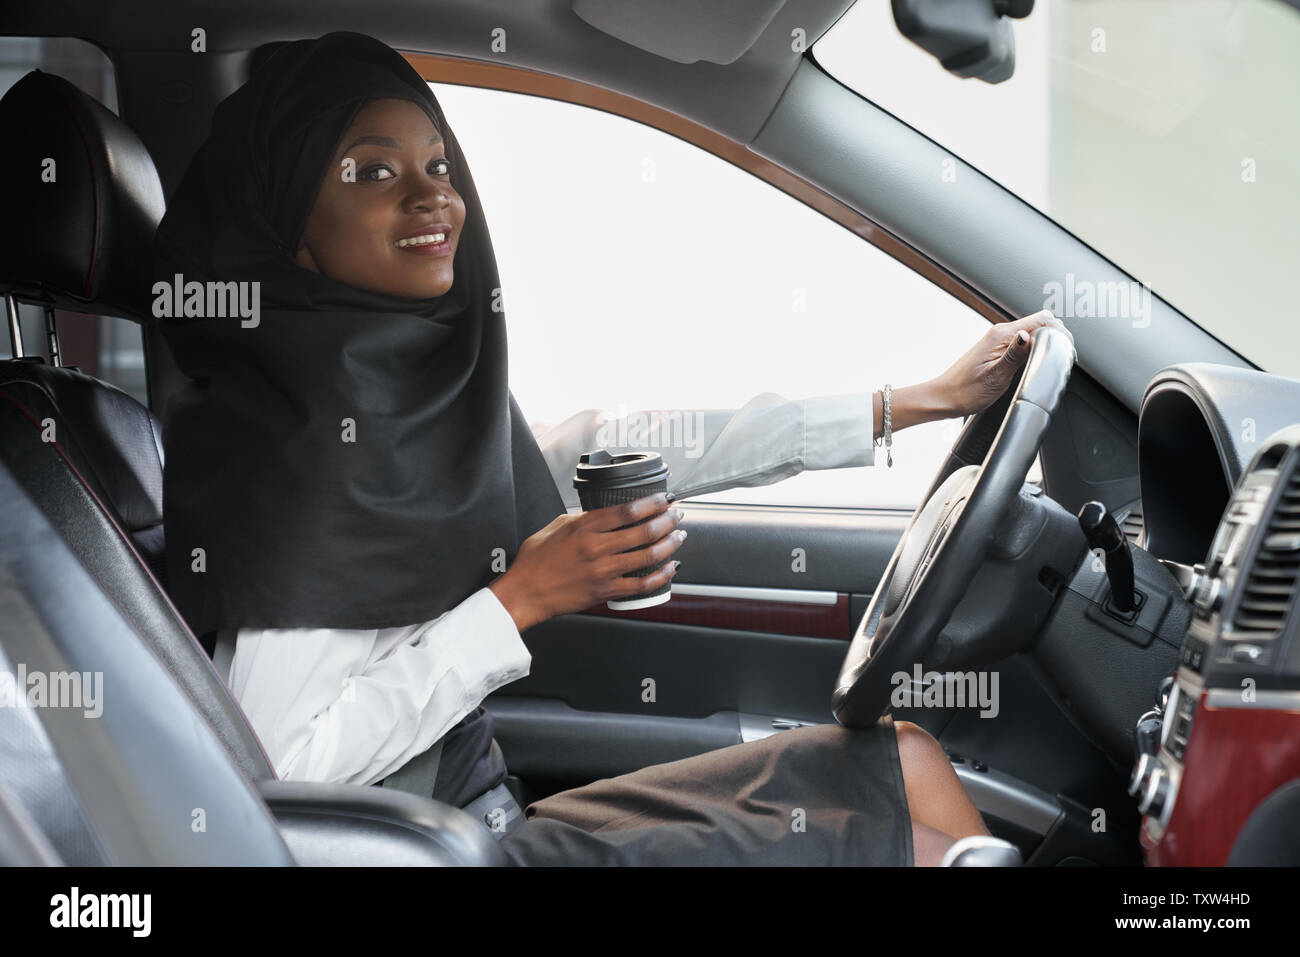 Cheerful african woman holding hand on steering wheel and coffee cup while driving car. Beautiful young muslim woman in black hijab sitting in car, looking at camera. Stock Photo